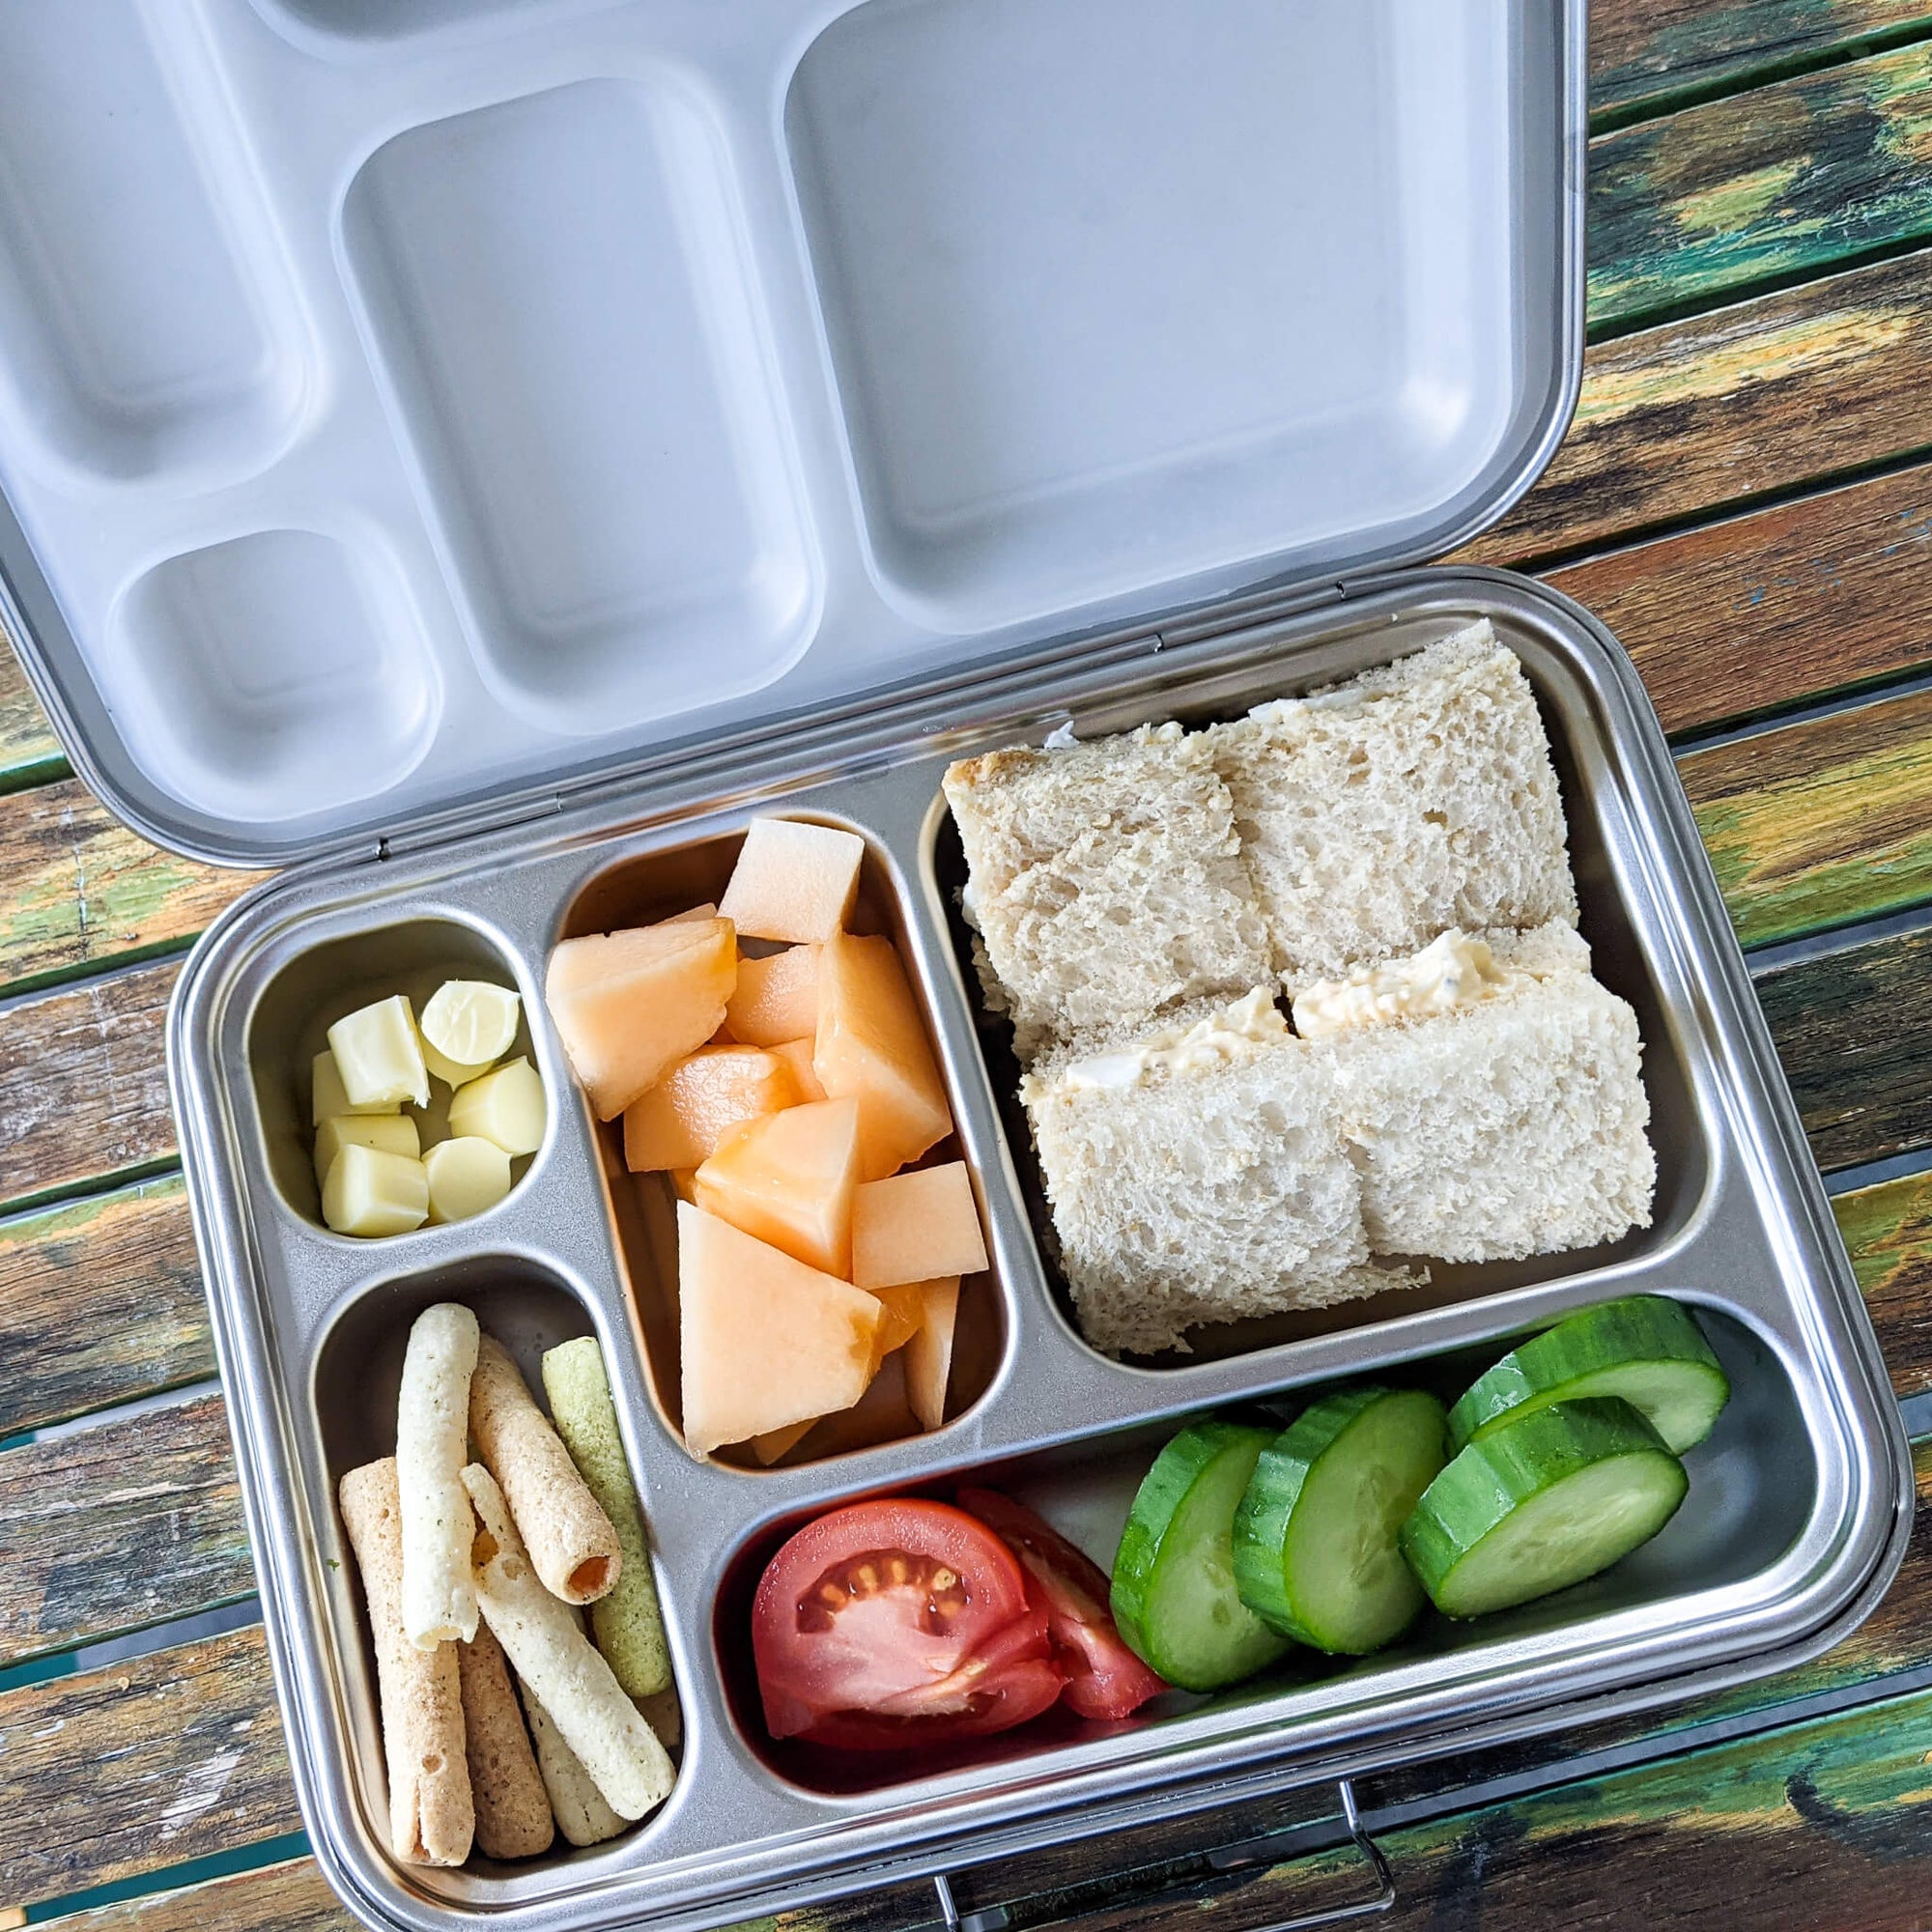 Bento Lunch Box 5 - Stainless Steel - Leak Proof